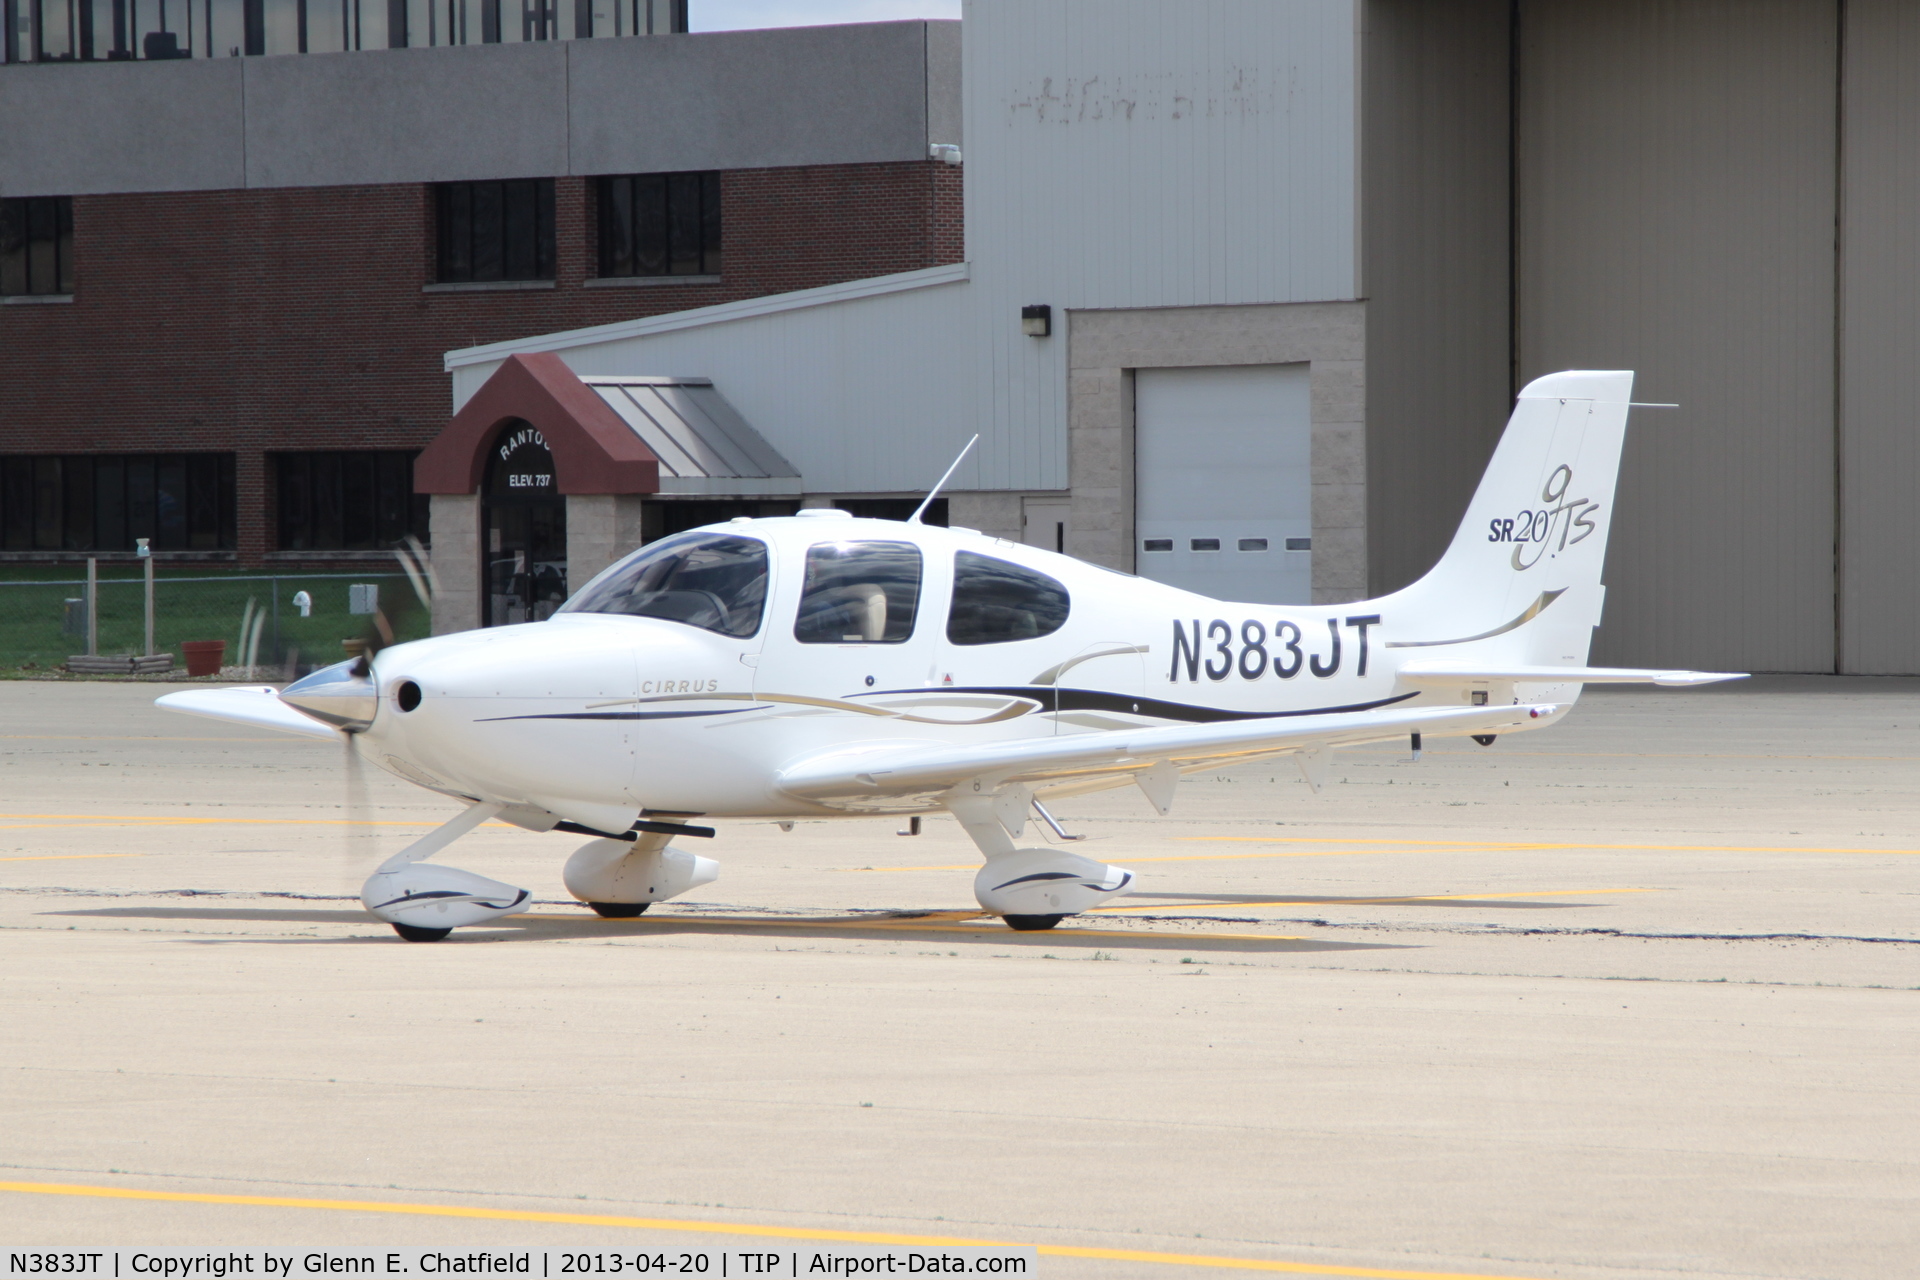 N383JT, 2006 Cirrus SR20 GTS C/N 1714, Across from the Octave Chanute Aviation Center